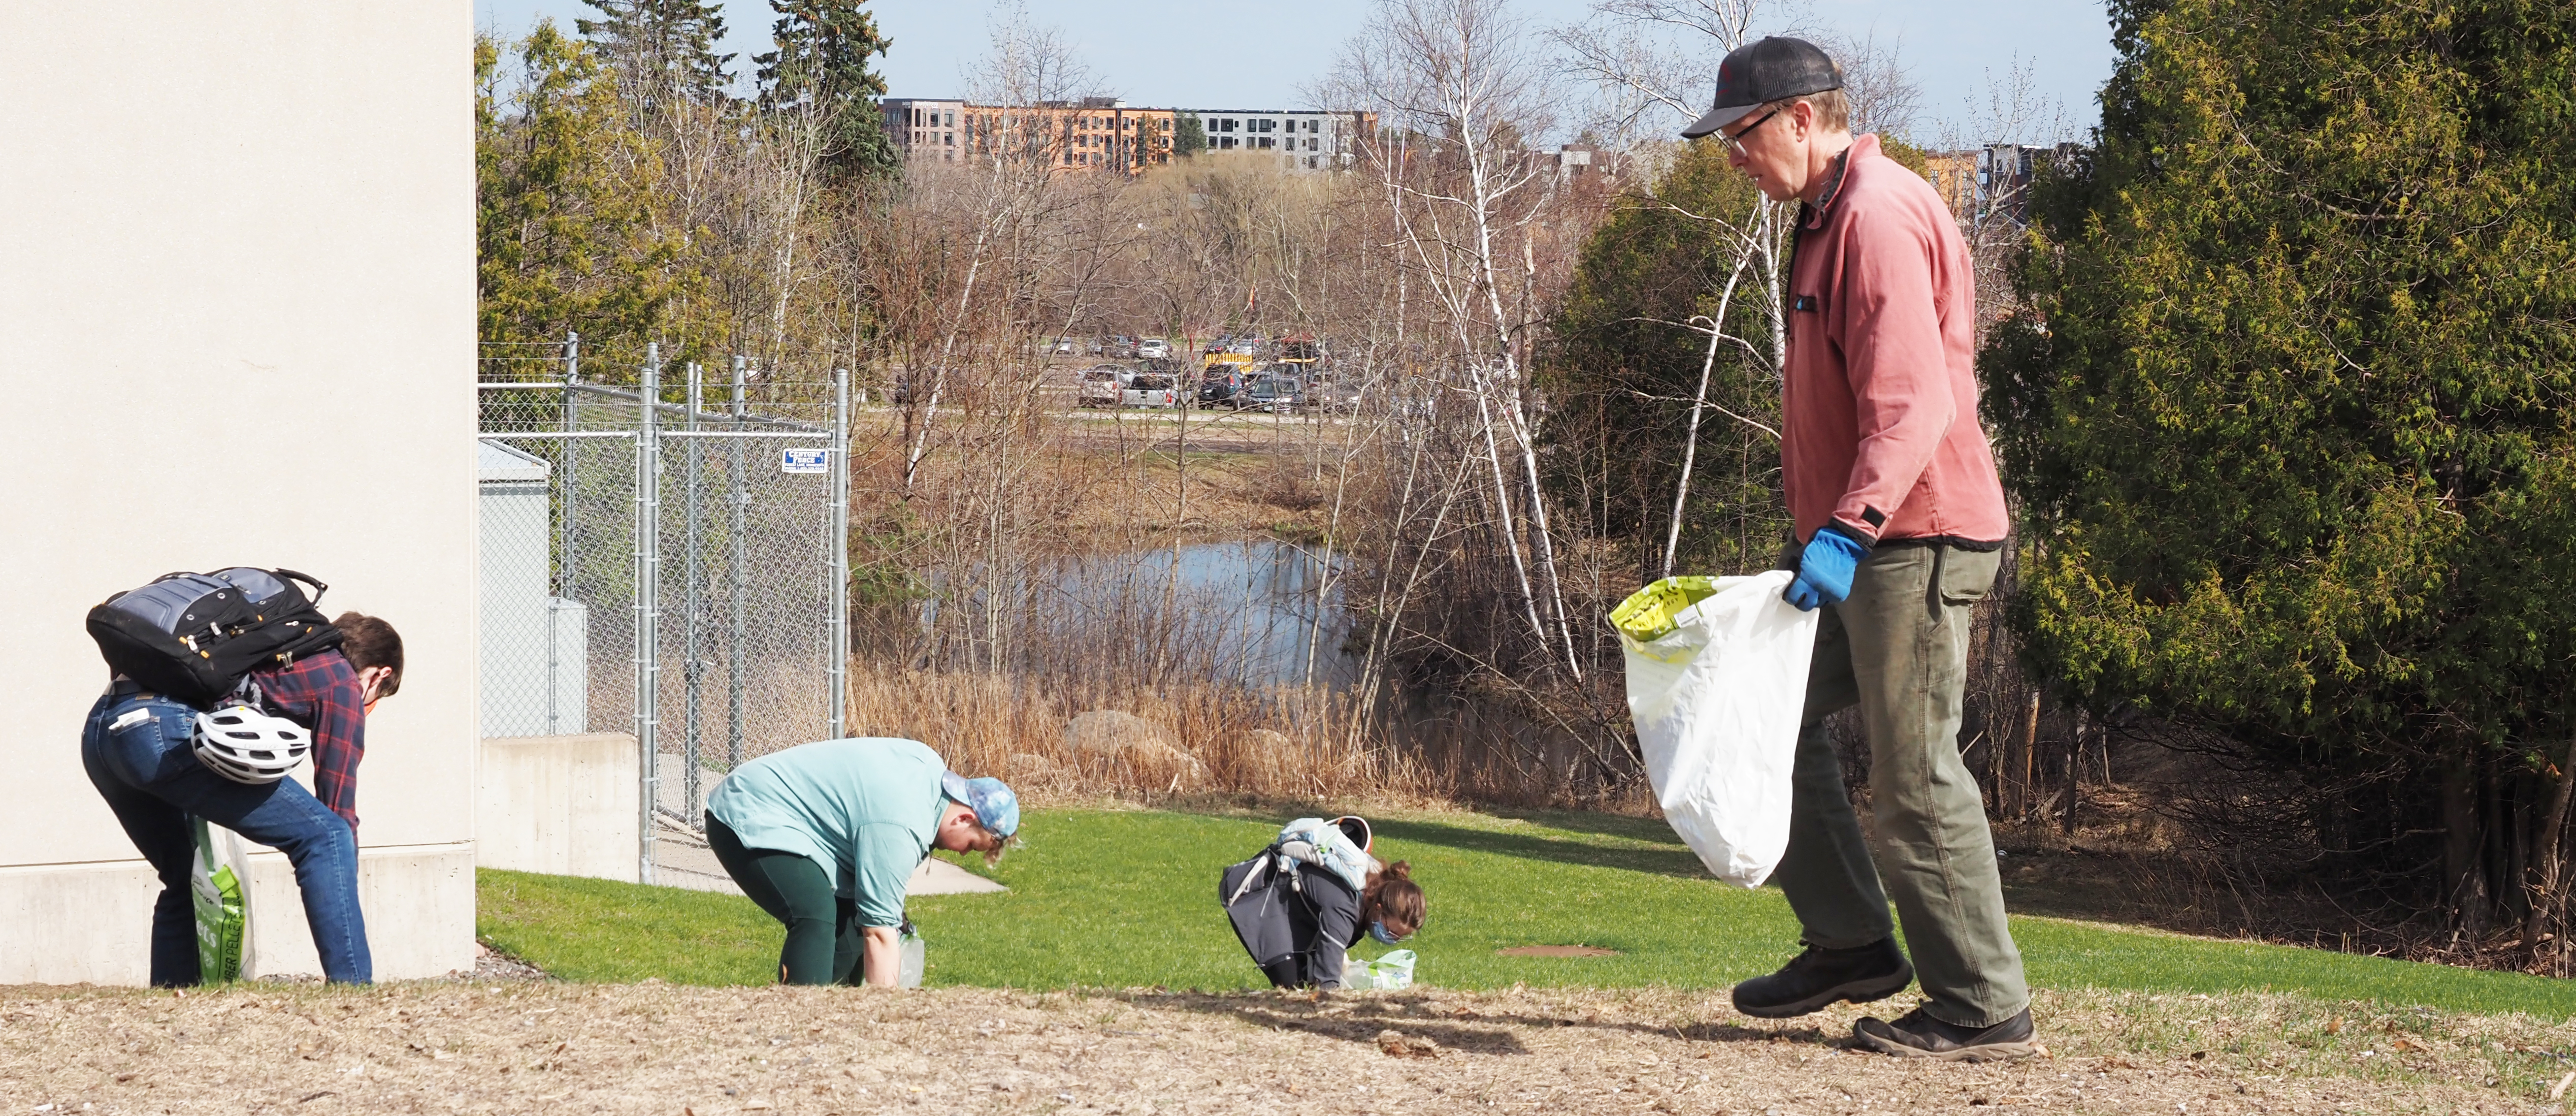 UMD students and staff picking up litter on campus